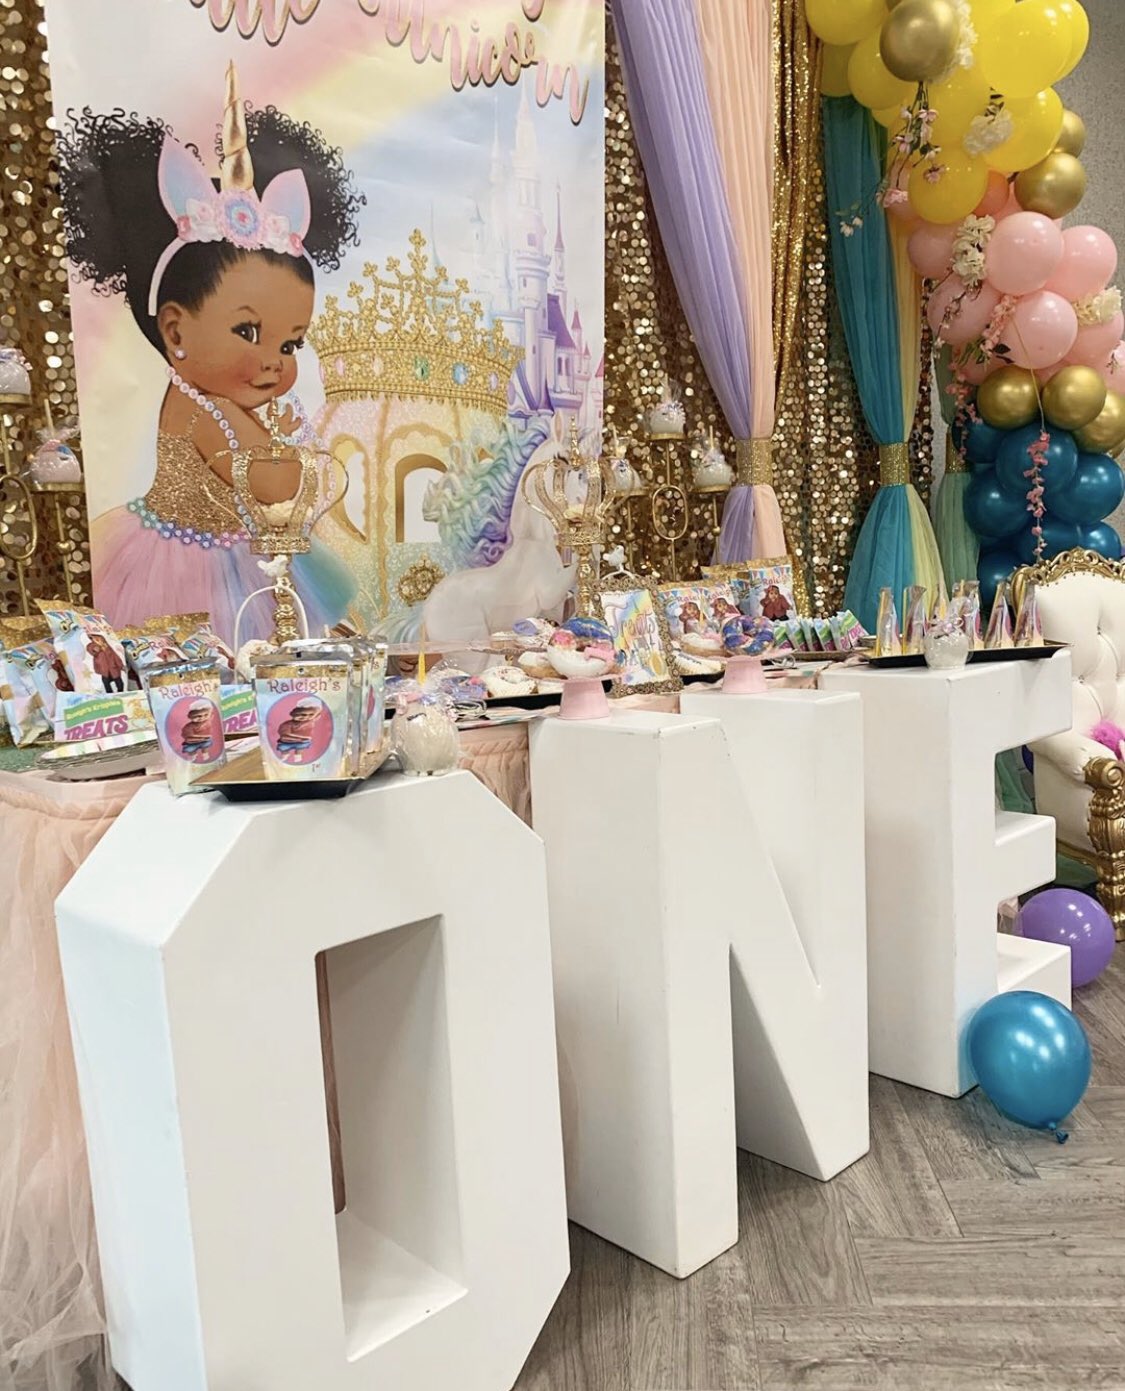 BannersbyRoz on X: #LVlovers #birthdaybackdrop 📸Customer photo Shop with  me at  • • • #personalizedbackdrop  #supportblackbusiness #stepandrepeat #stepandrepeatbackdrops #bannersbyroz # lv #louisvuitton #eventplanner